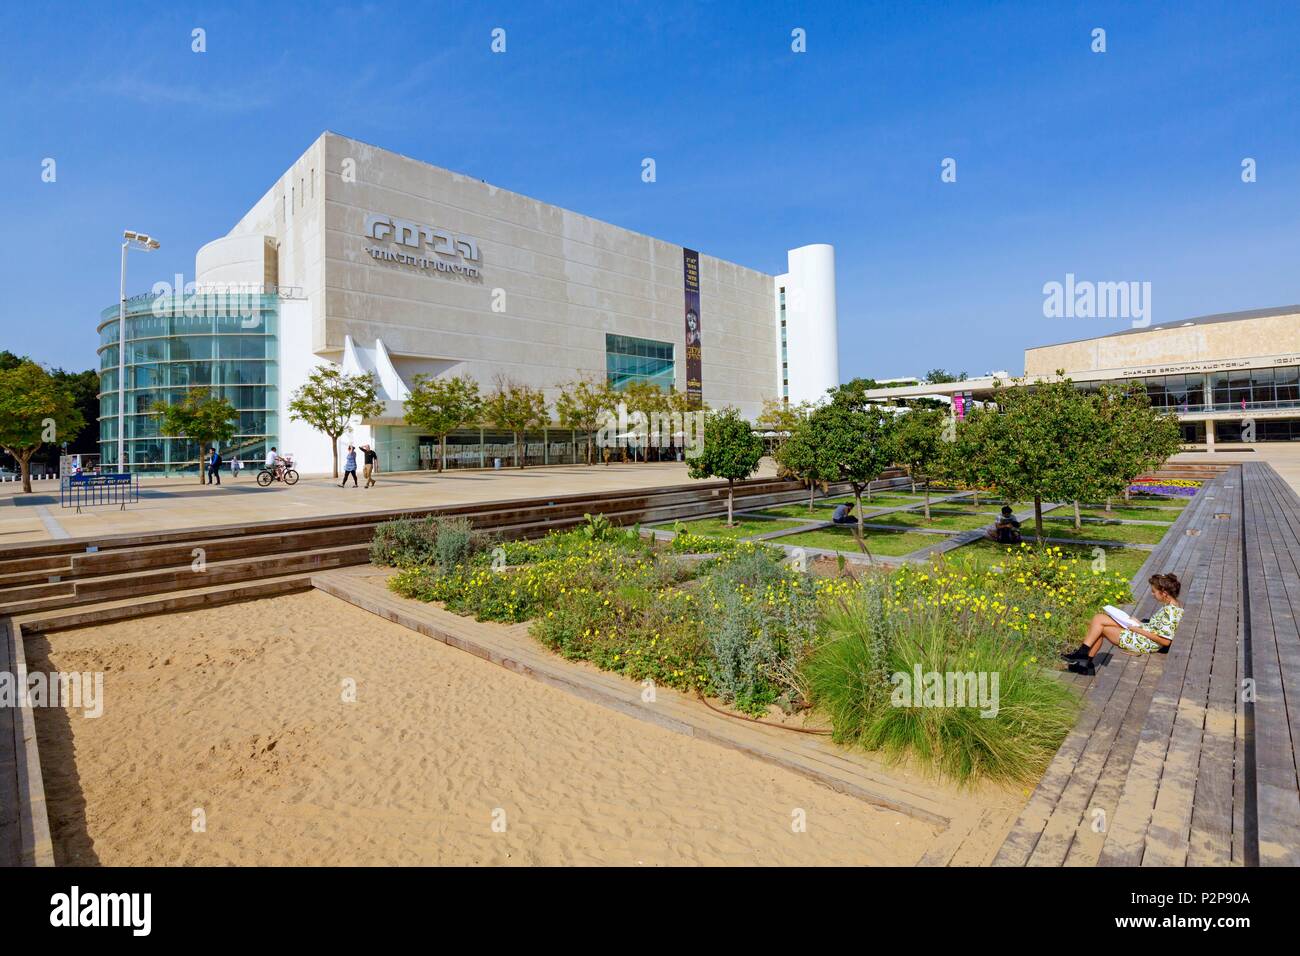 Israel, Tel Aviv-Jaffa, Tel-Aviv, the city center, Habima Square and the Habima Theater, the national theater of Israel, an expression of the spirit of the Jewish people with a particular focus on Hebrew culture and language, right, the Charles Bronfman Auditorium Stock Photo